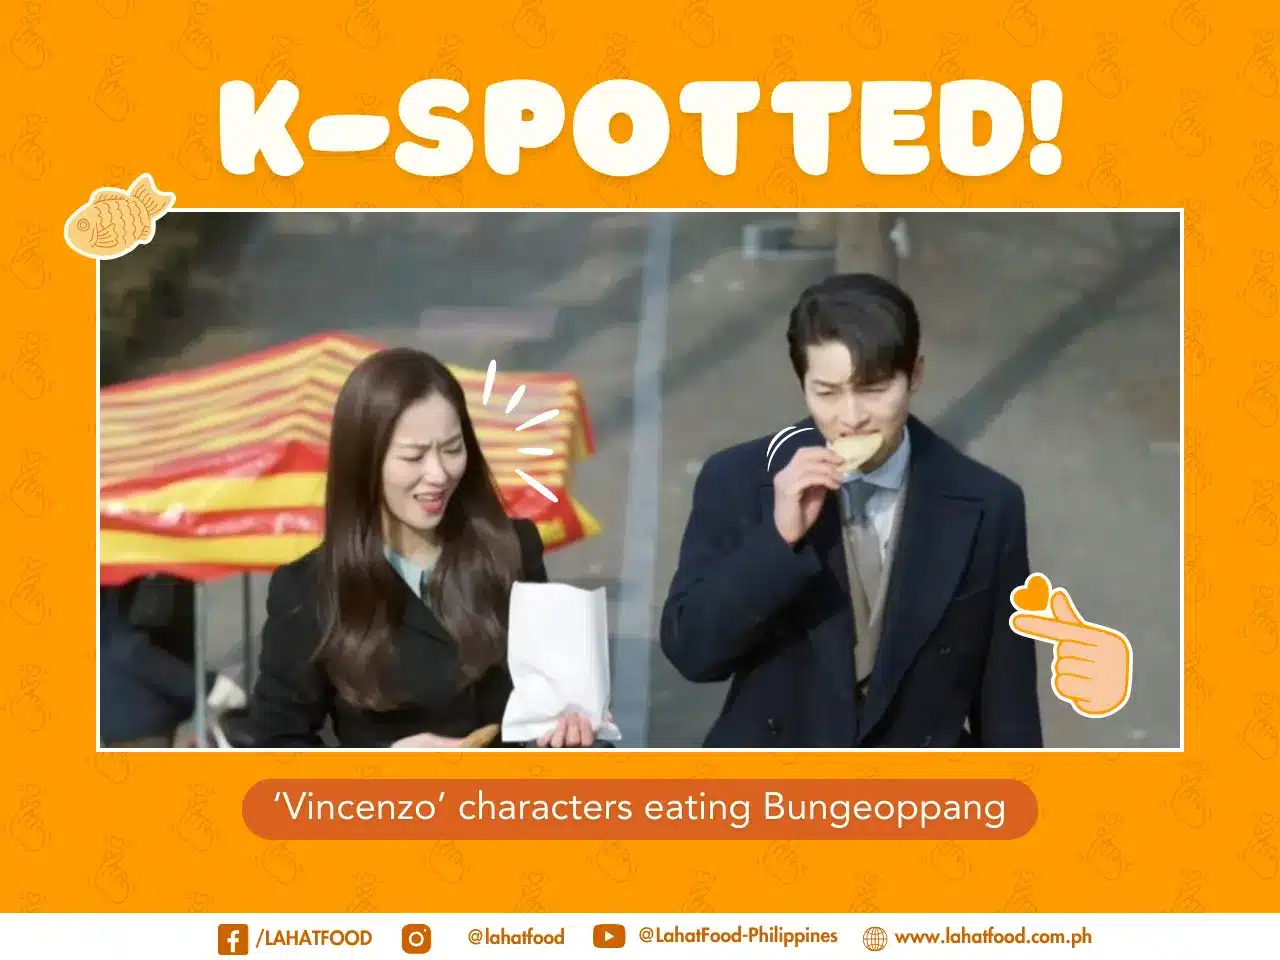 K-SPOTTED KDRAMA (1)